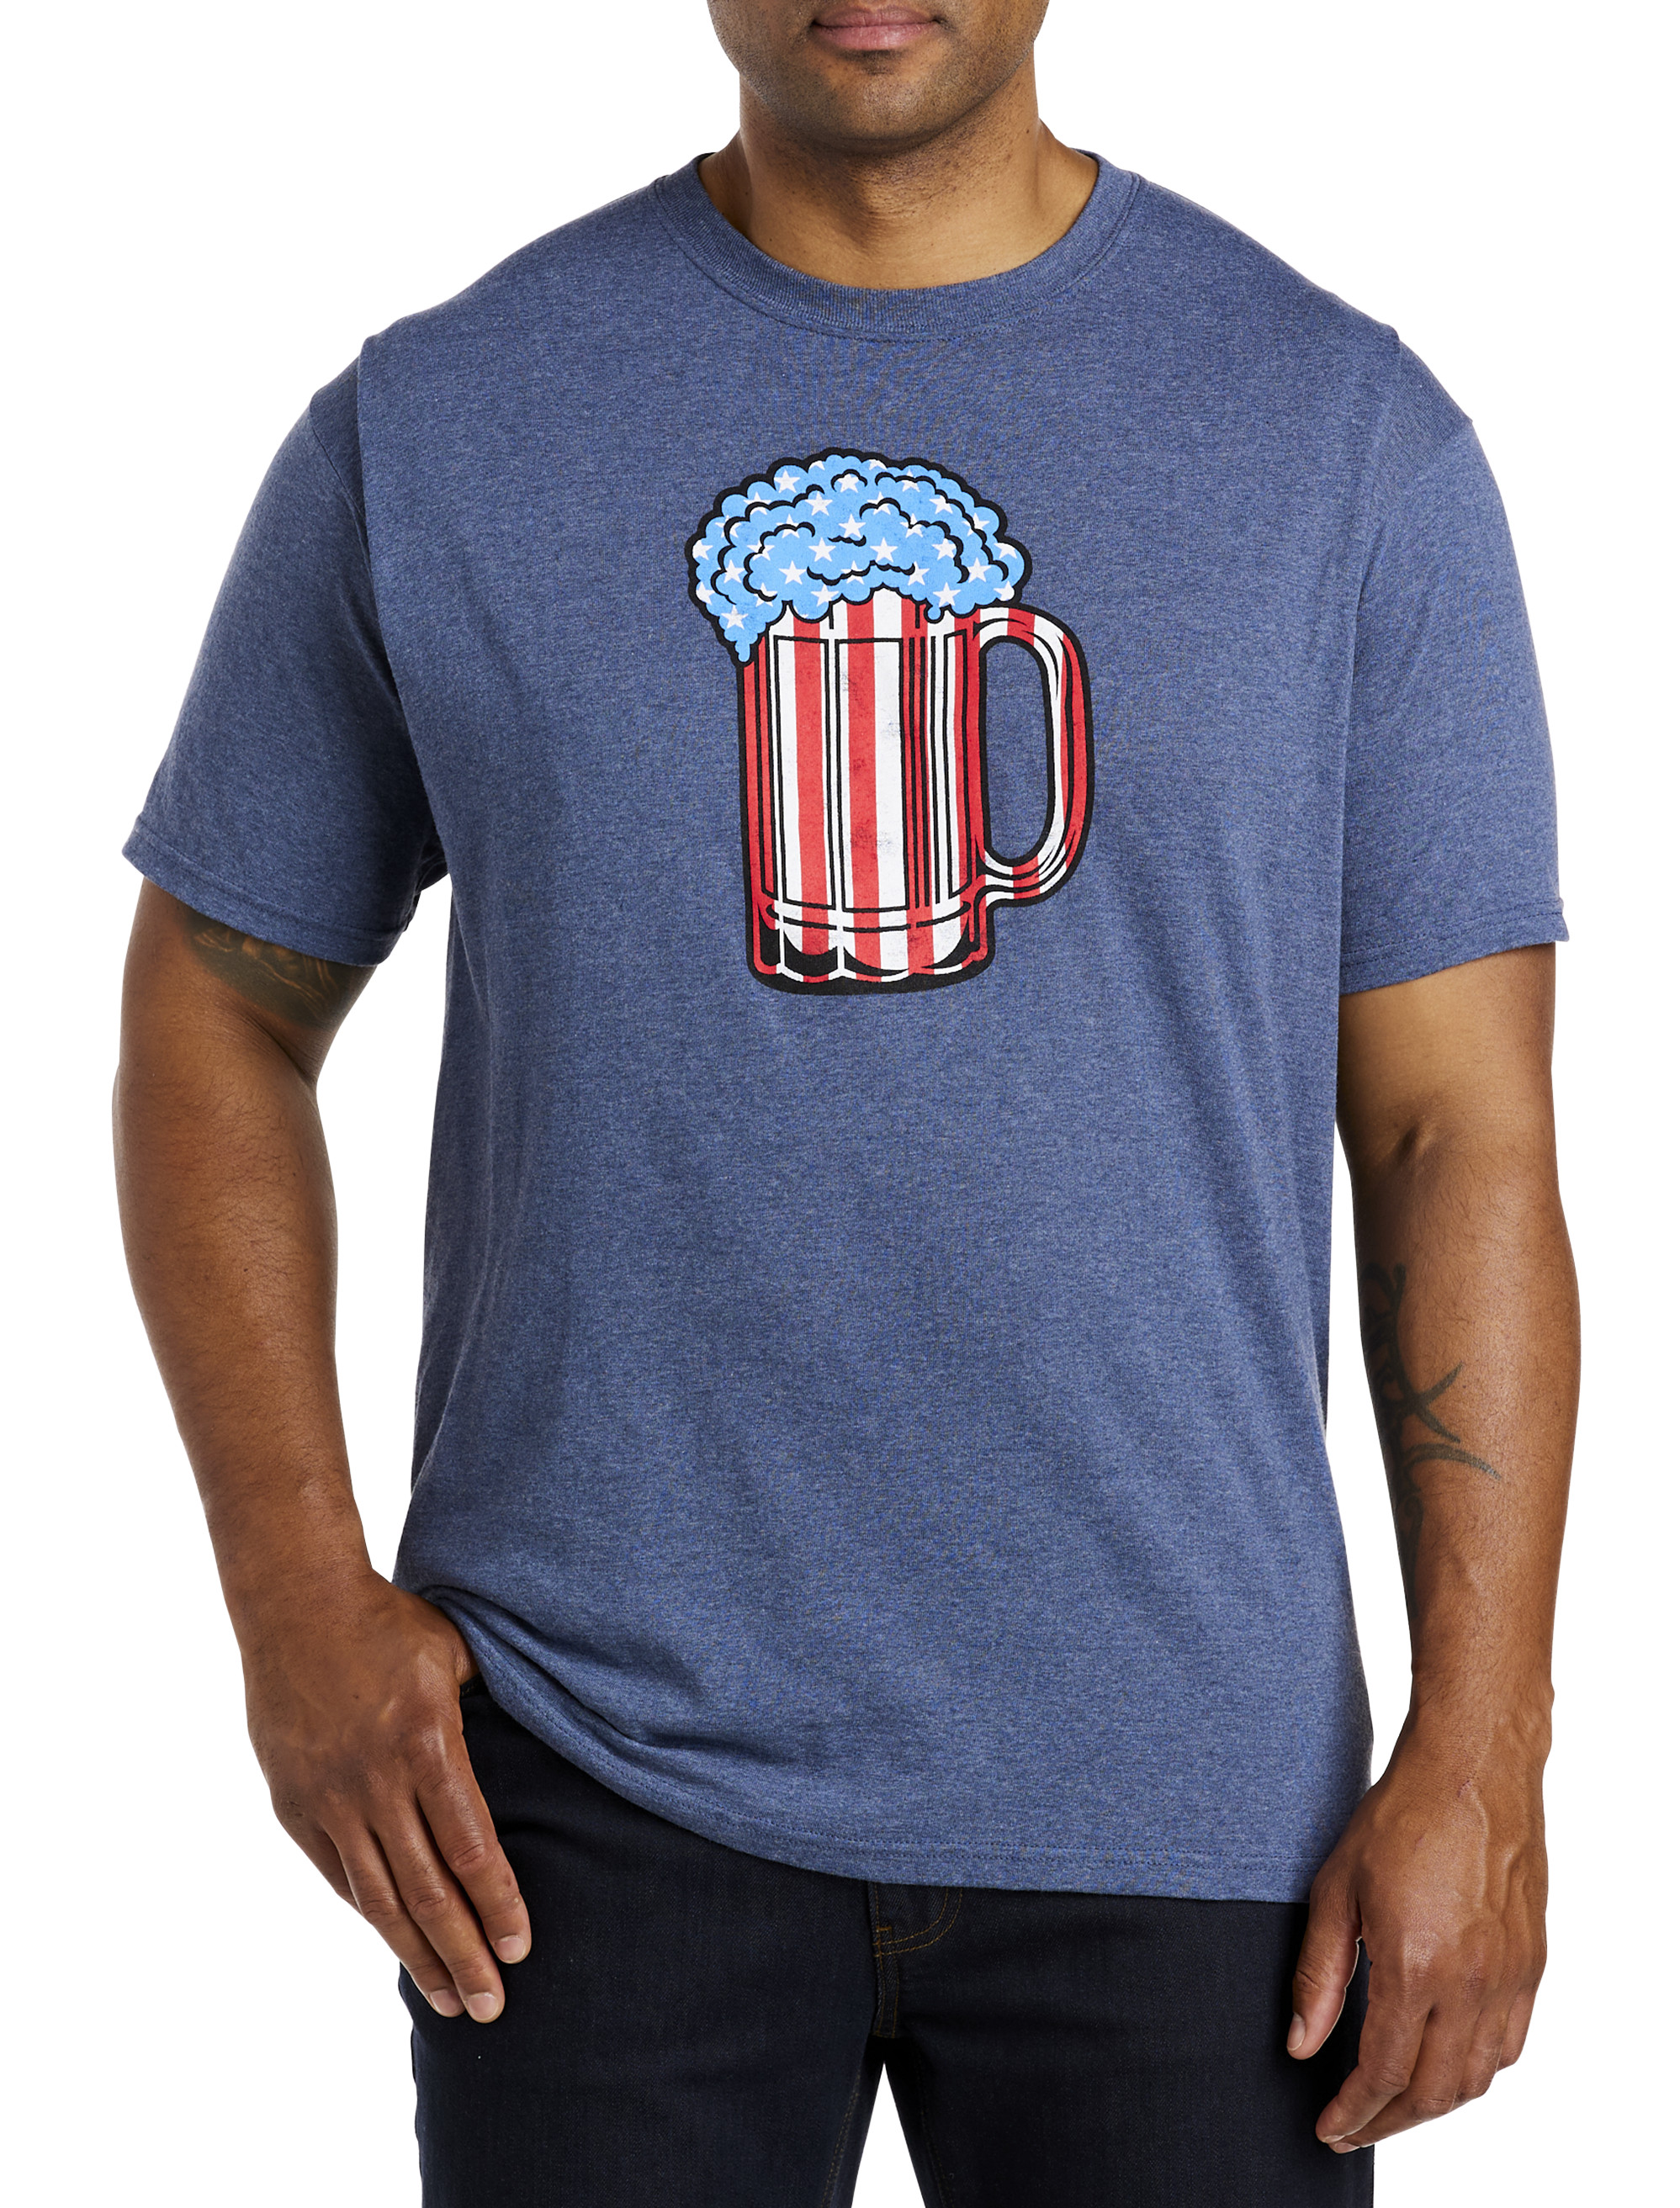 old navy 4th of july Essential T-Shirt by Desibeau